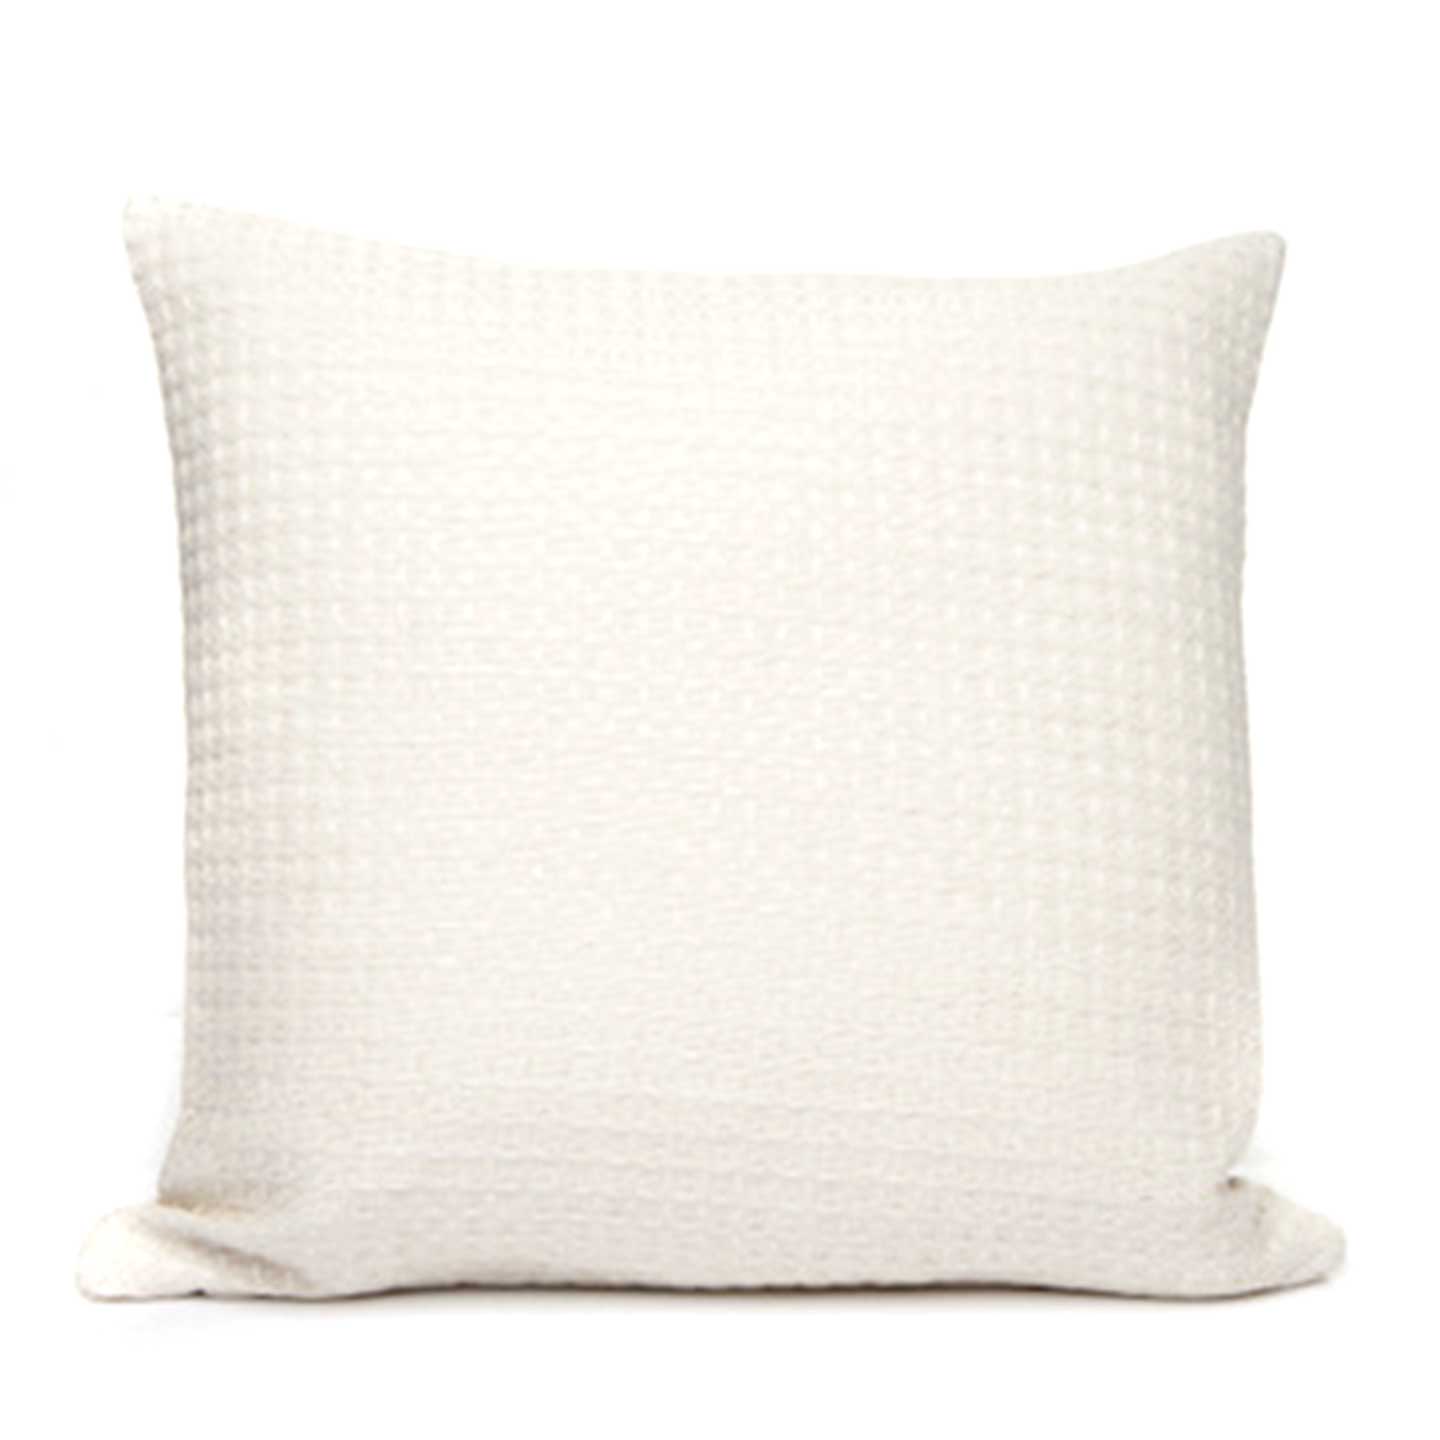 The Morgan pillow by Beau Home